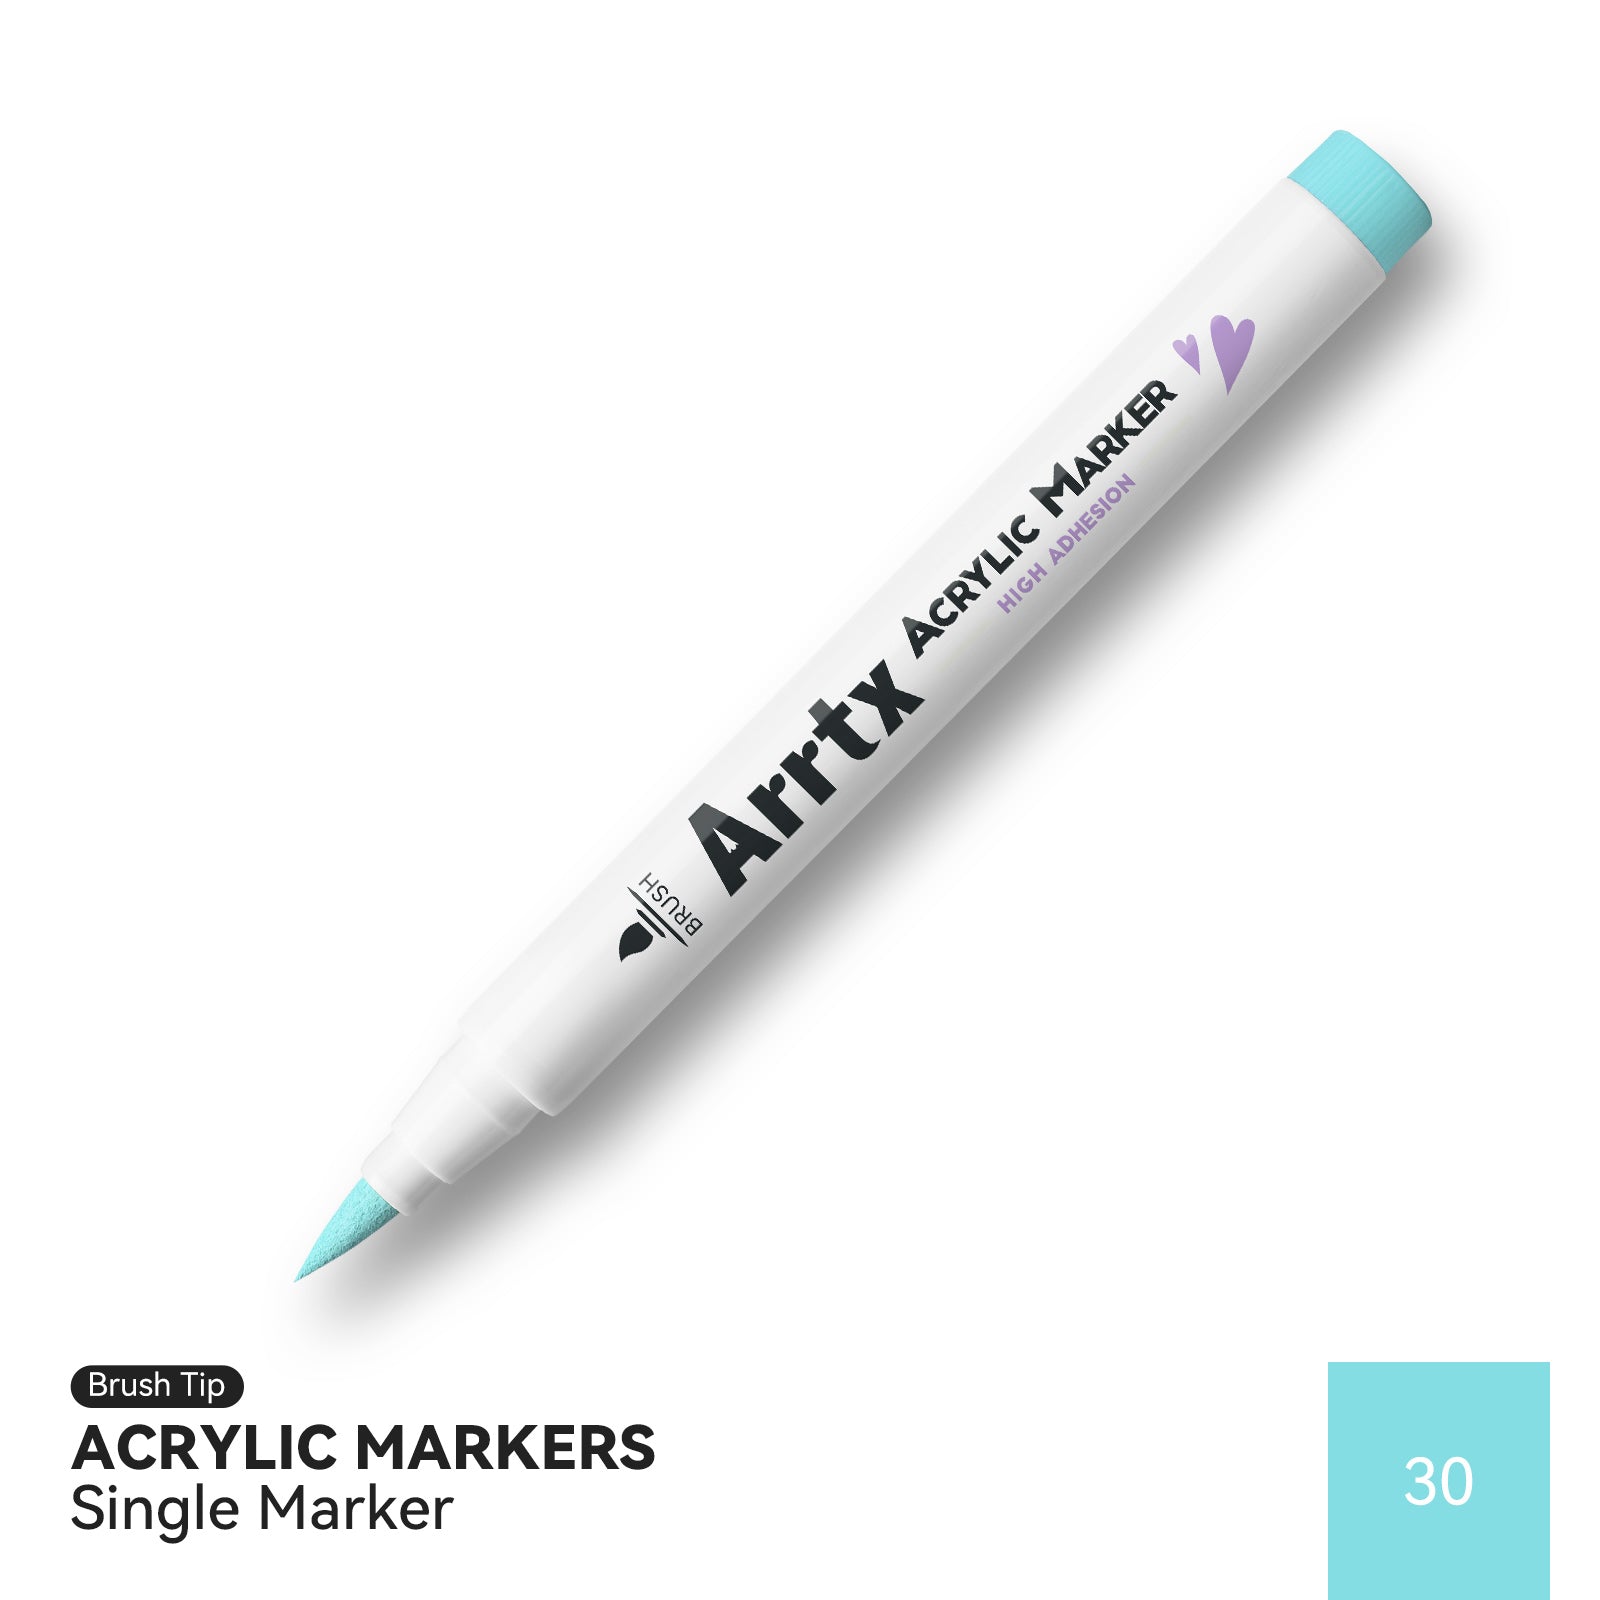 Arrtx Acrylic Paint Pens, 58 Colors for Rock Painting, Extra Brush